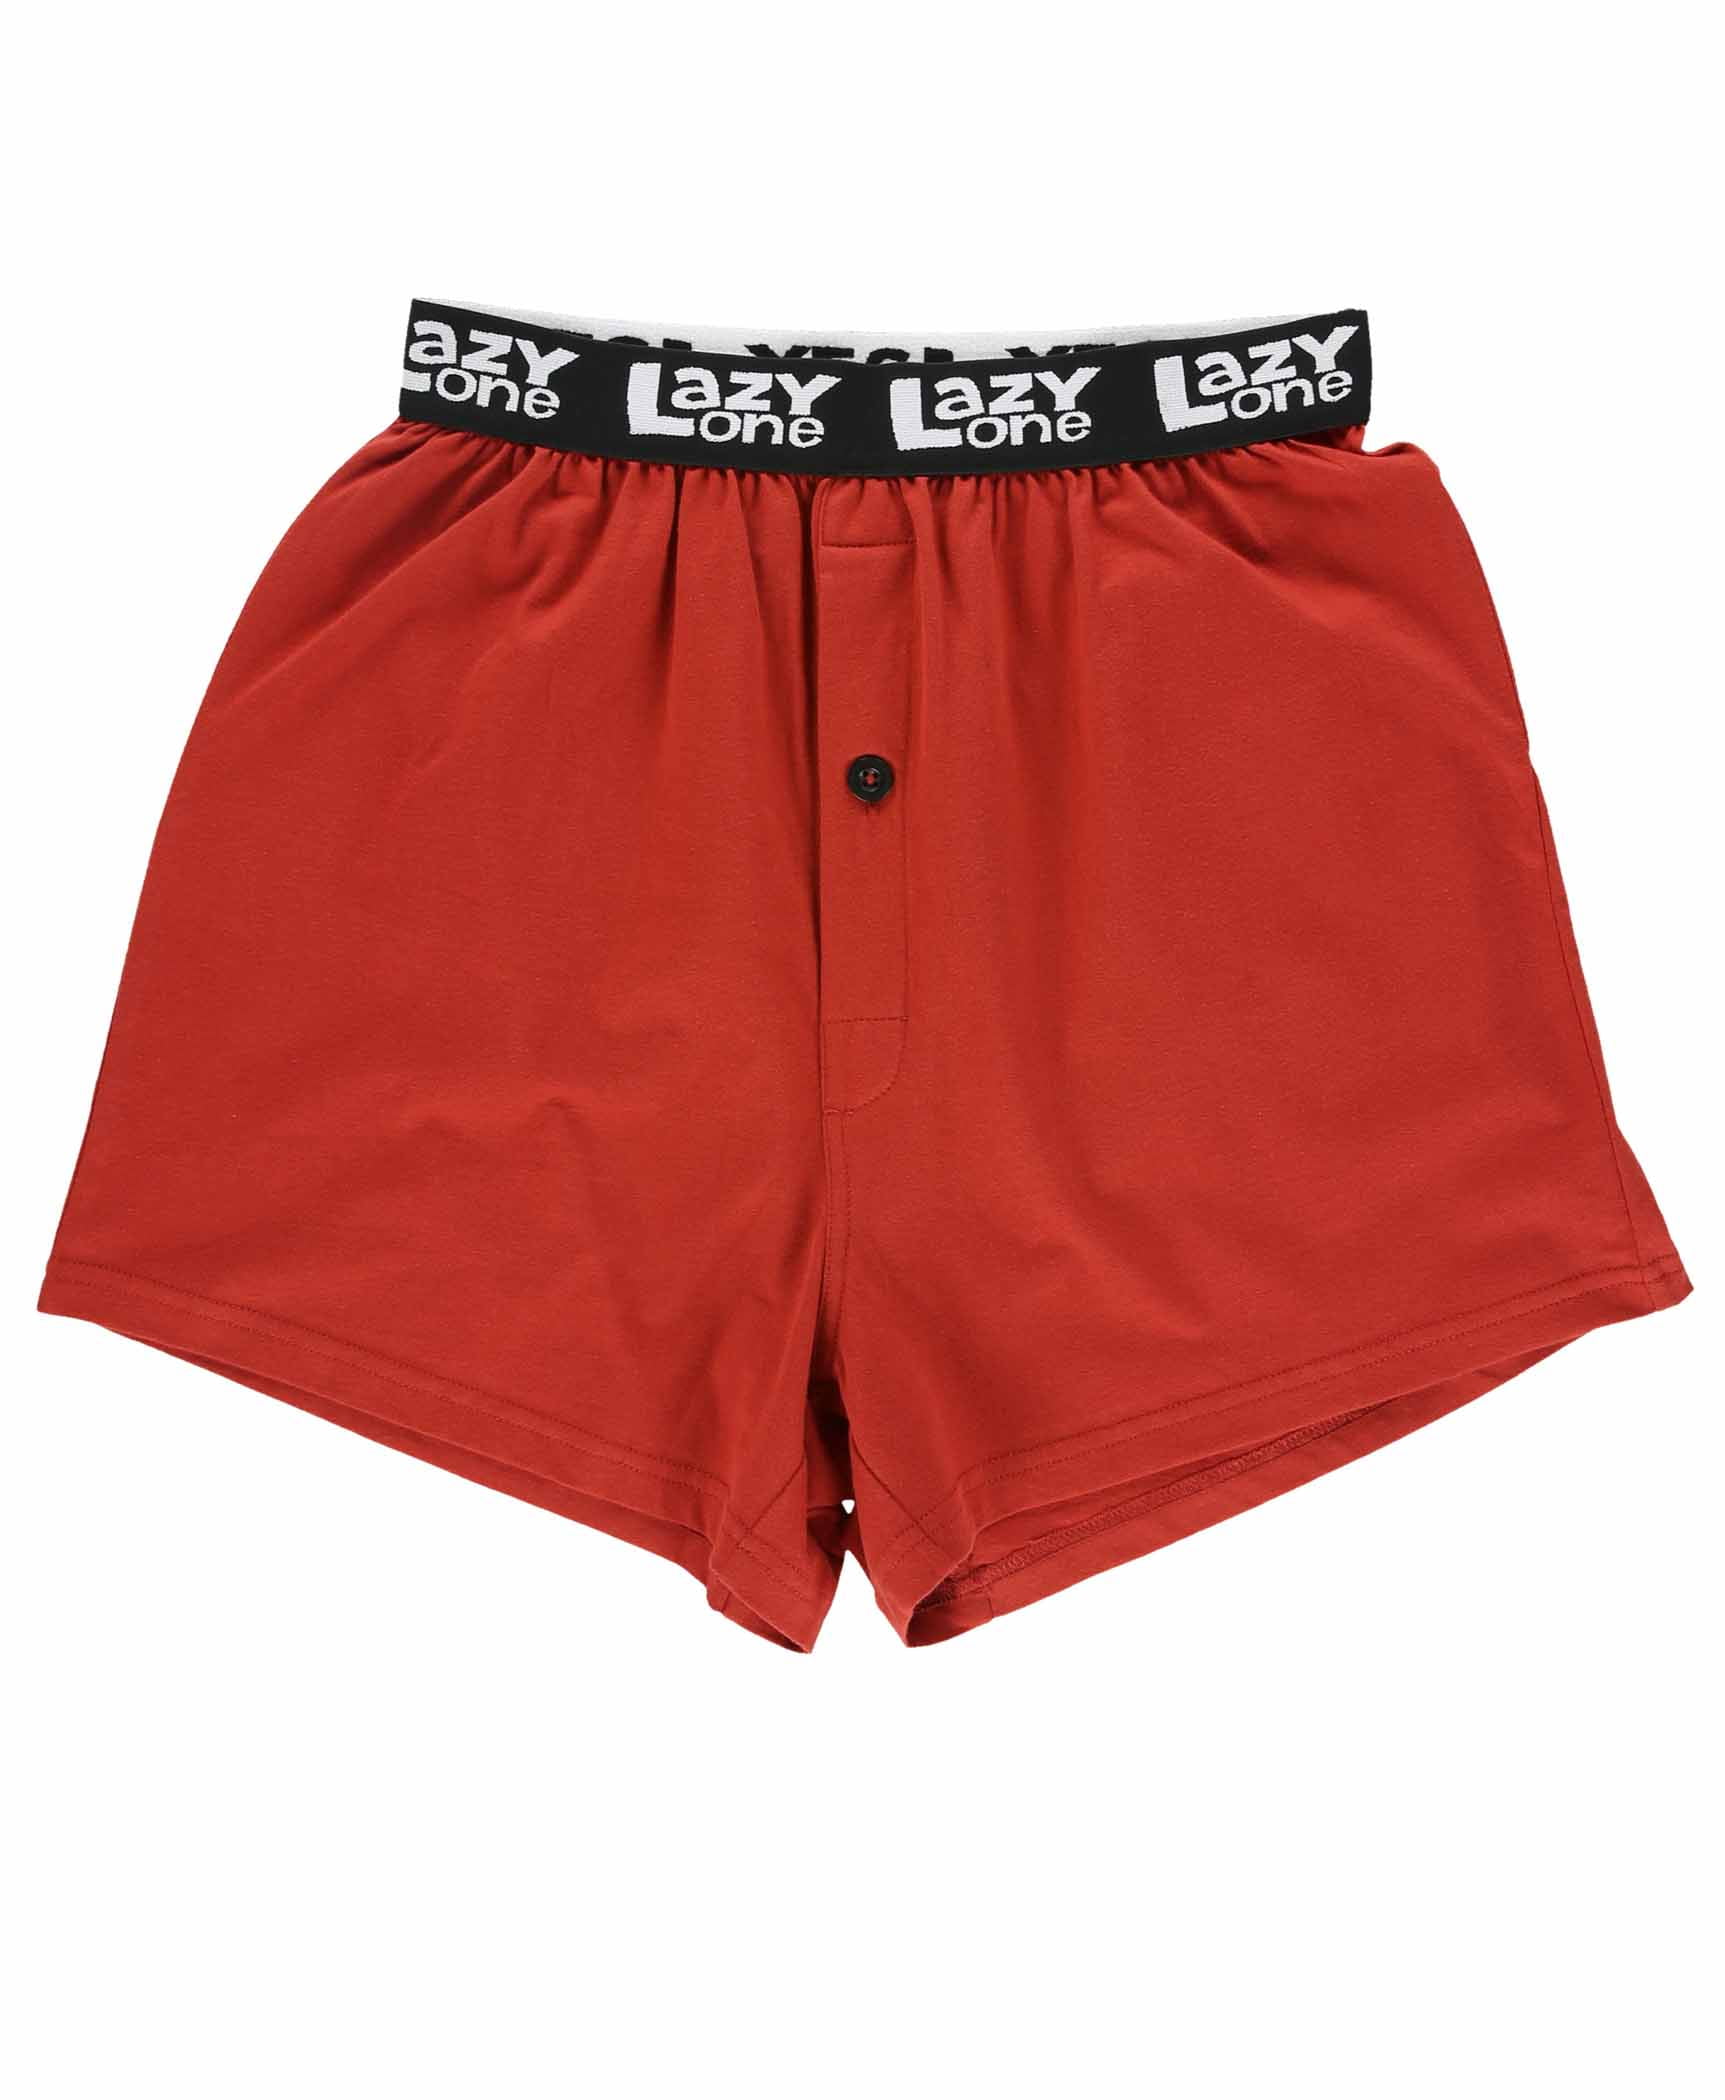 Buy Shooting Blanks Boxers, Free Shipping, Funny Vasectomy Gift Online in  India 